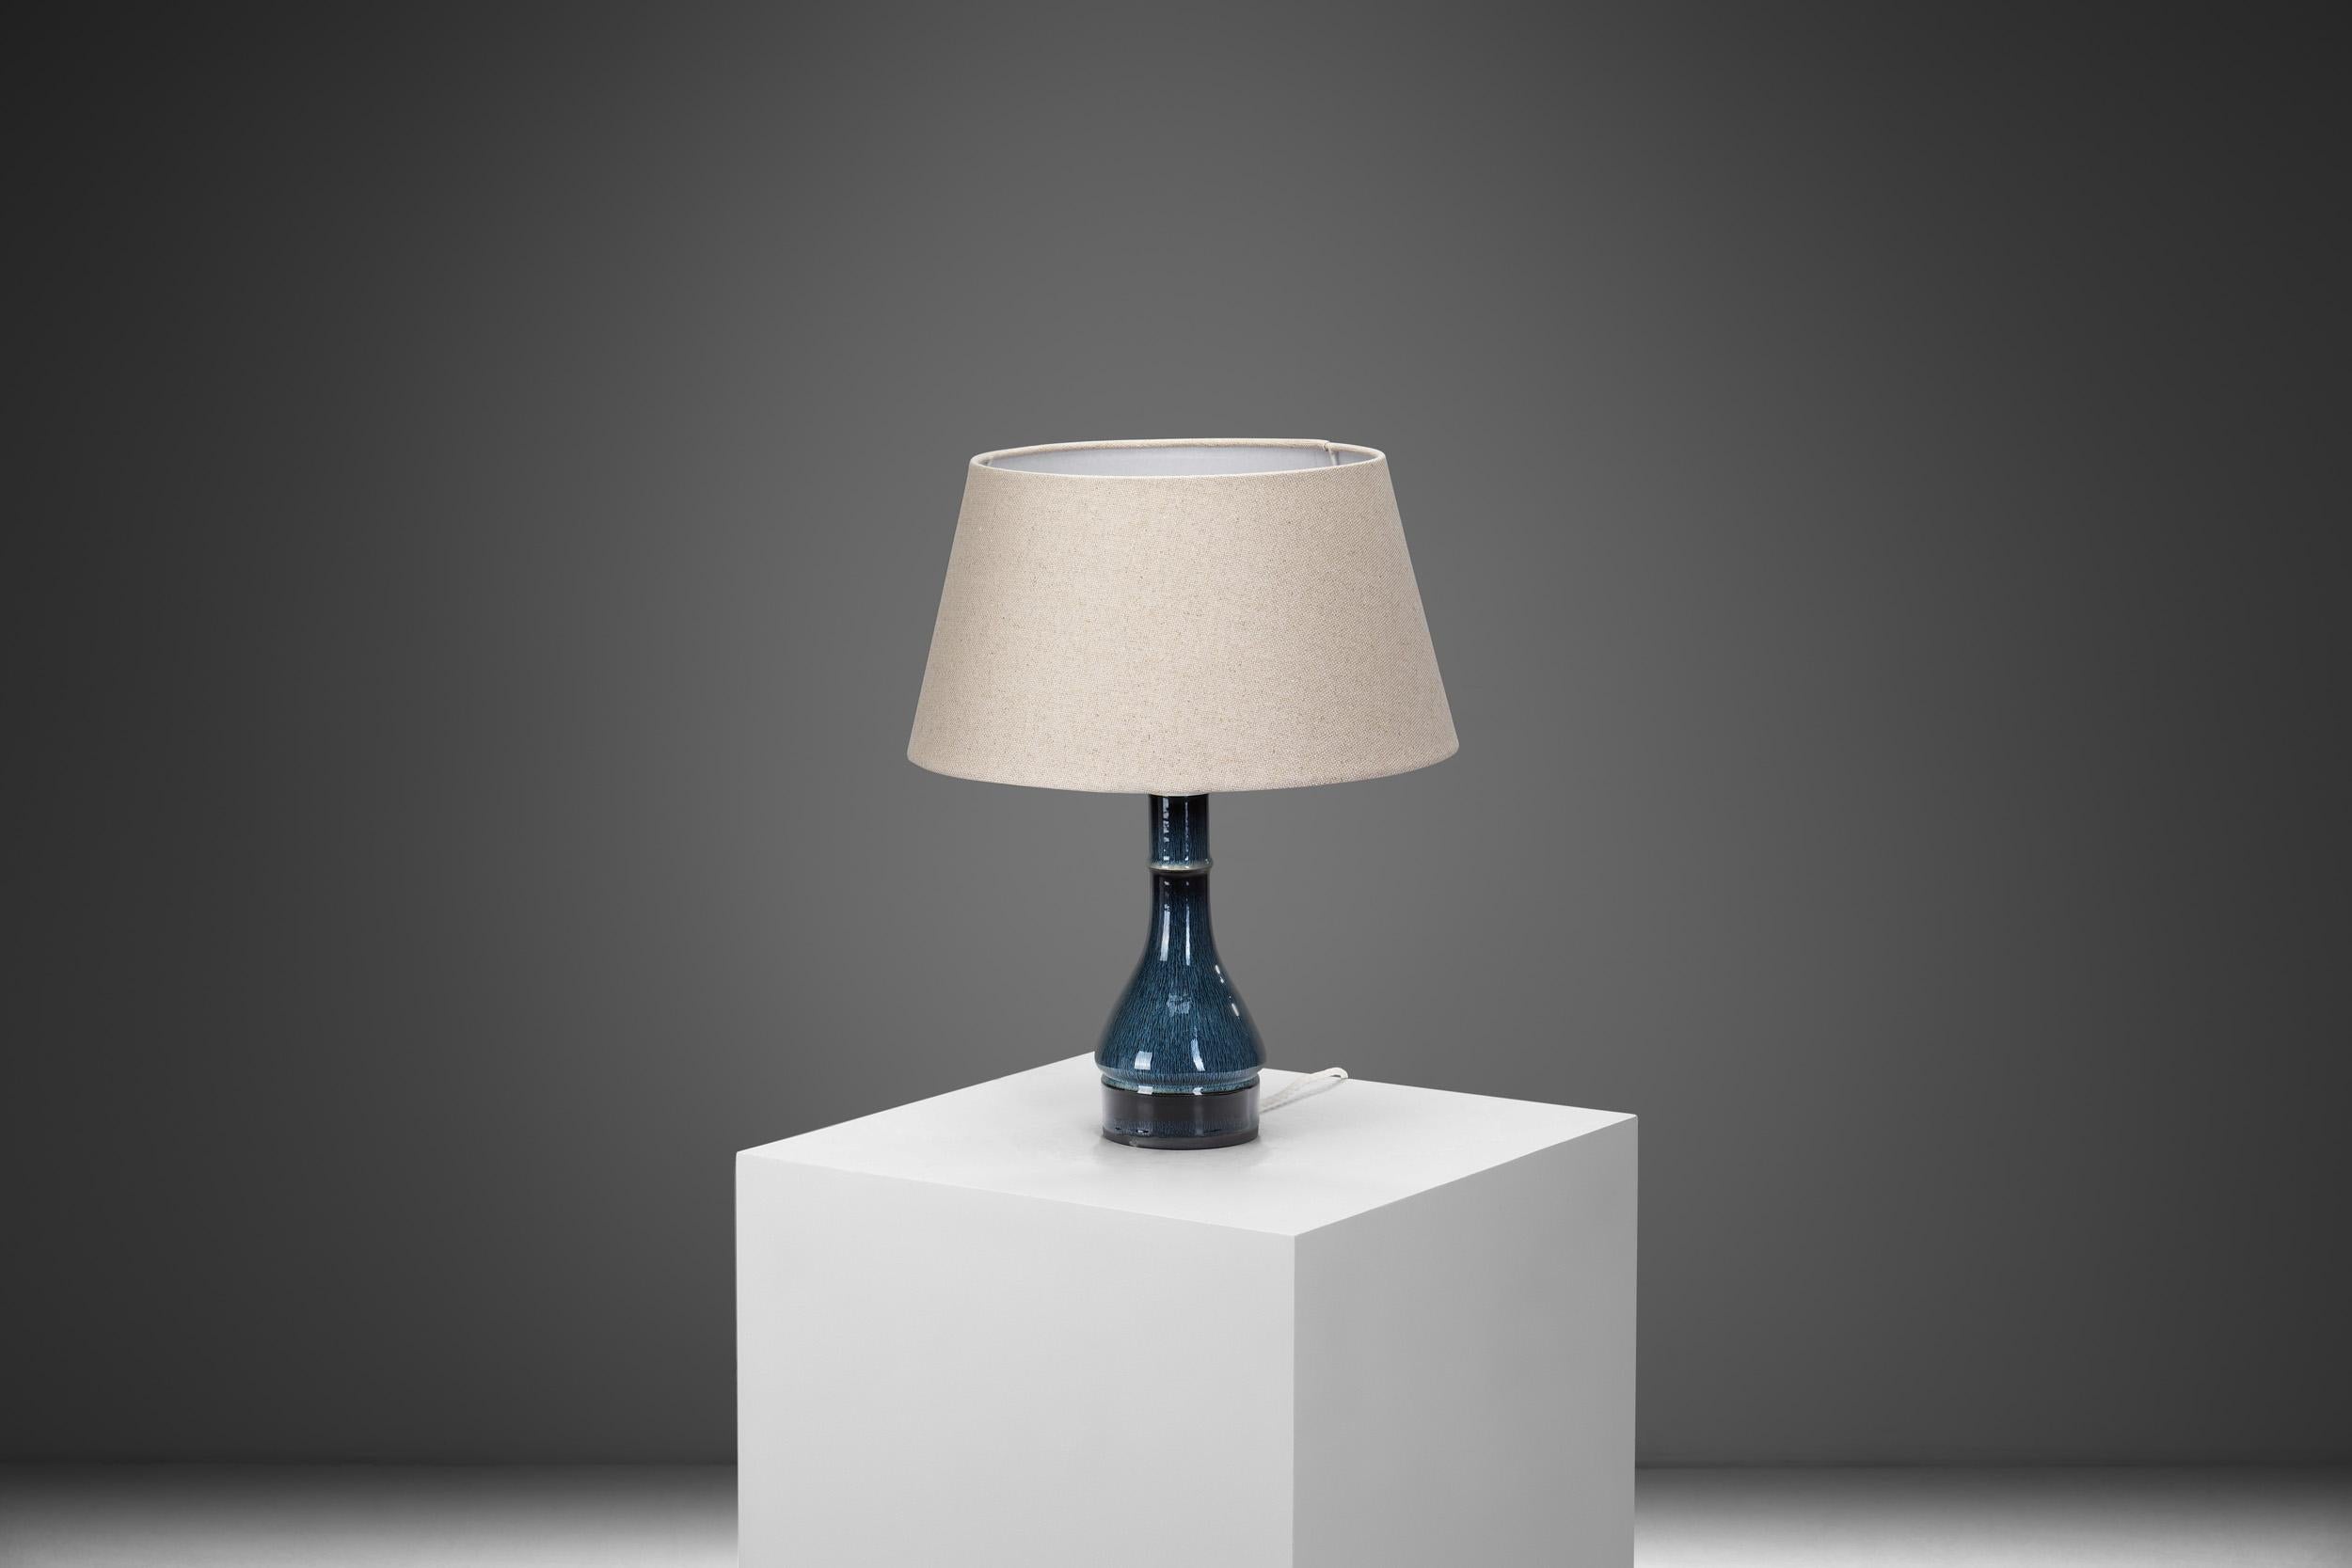 Mid-20th Century Blue Glaze Stoneware Table Lamp by Carl-Harry Stålhane, Sweden 1960s For Sale